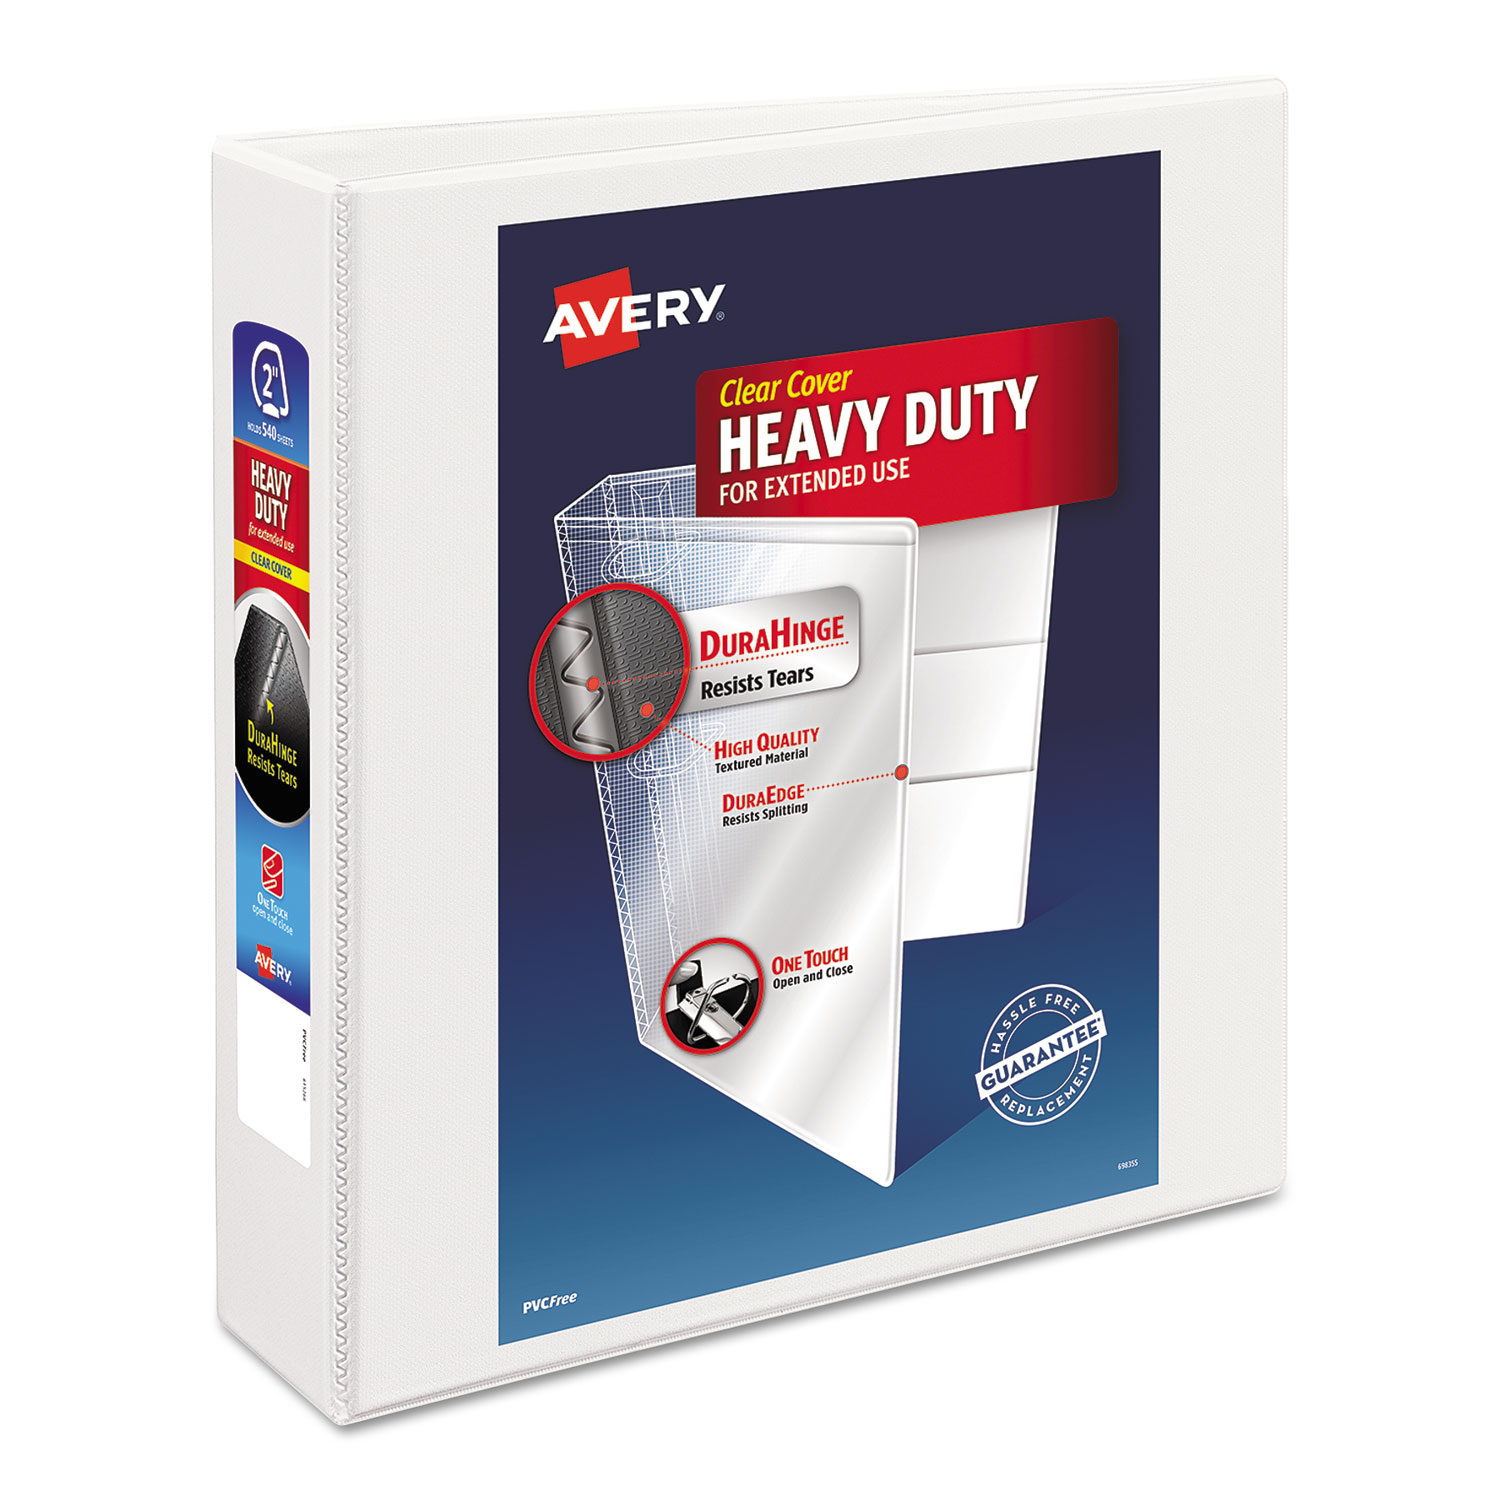  Avery 05504 Heavy-Duty Non Stick View Binder with DuraHinge and Slant Rings, 3 Rings, 2 Capacity, 11 x 8.5, White (AVE05504) 